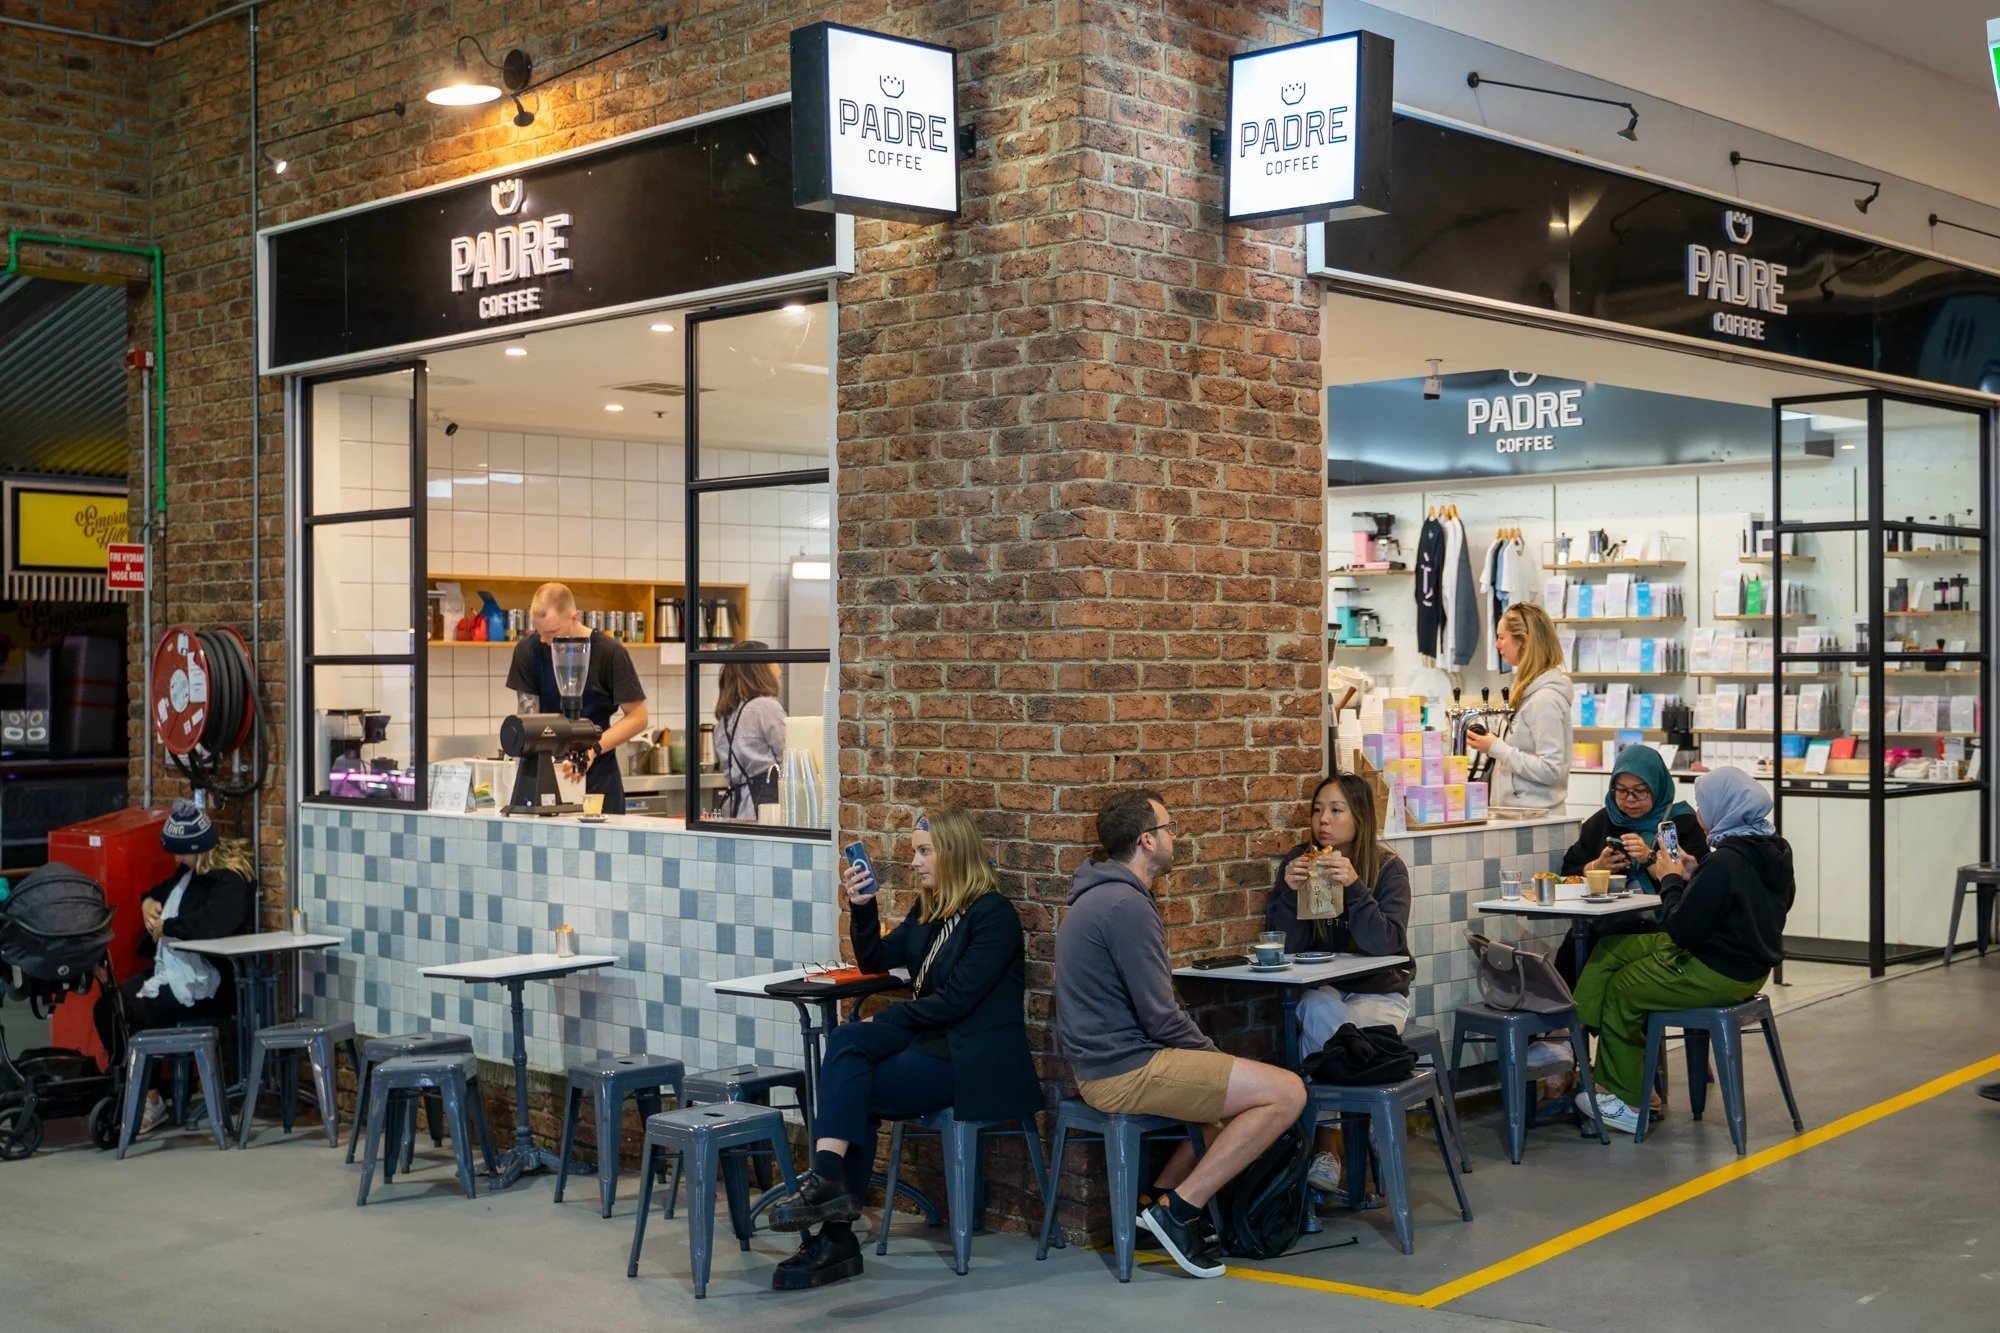 PADRE COFFEE SOUTH MELBOURNE MARKET